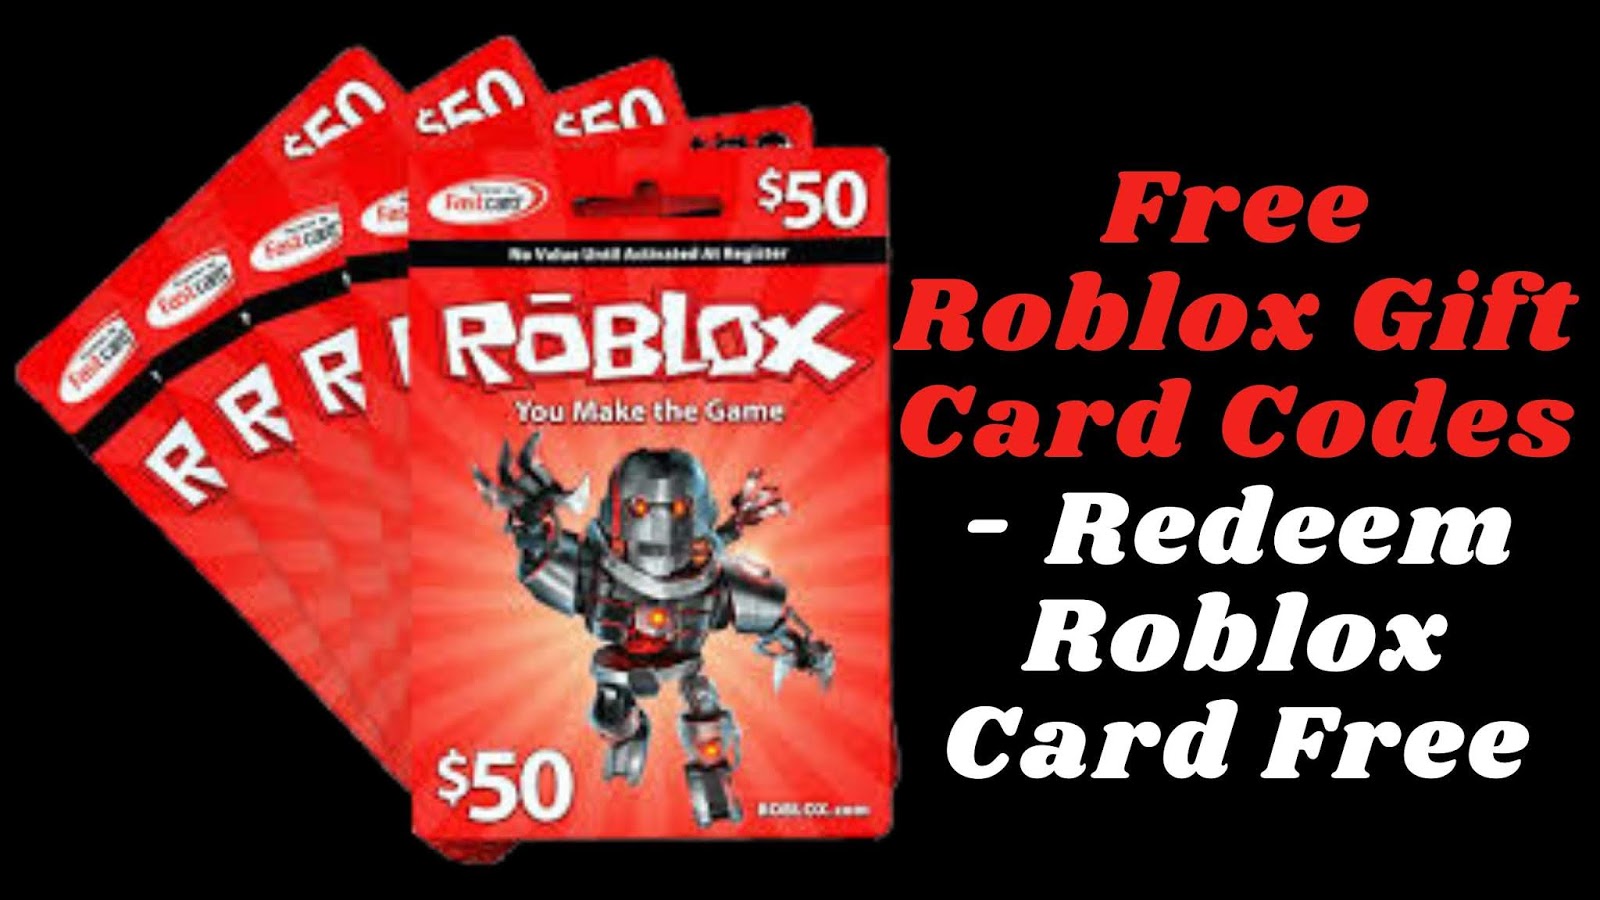 Free Gift Cards Free Roblox Gift Card Codes Redeem Roblox Card Free - free roblox card codes free